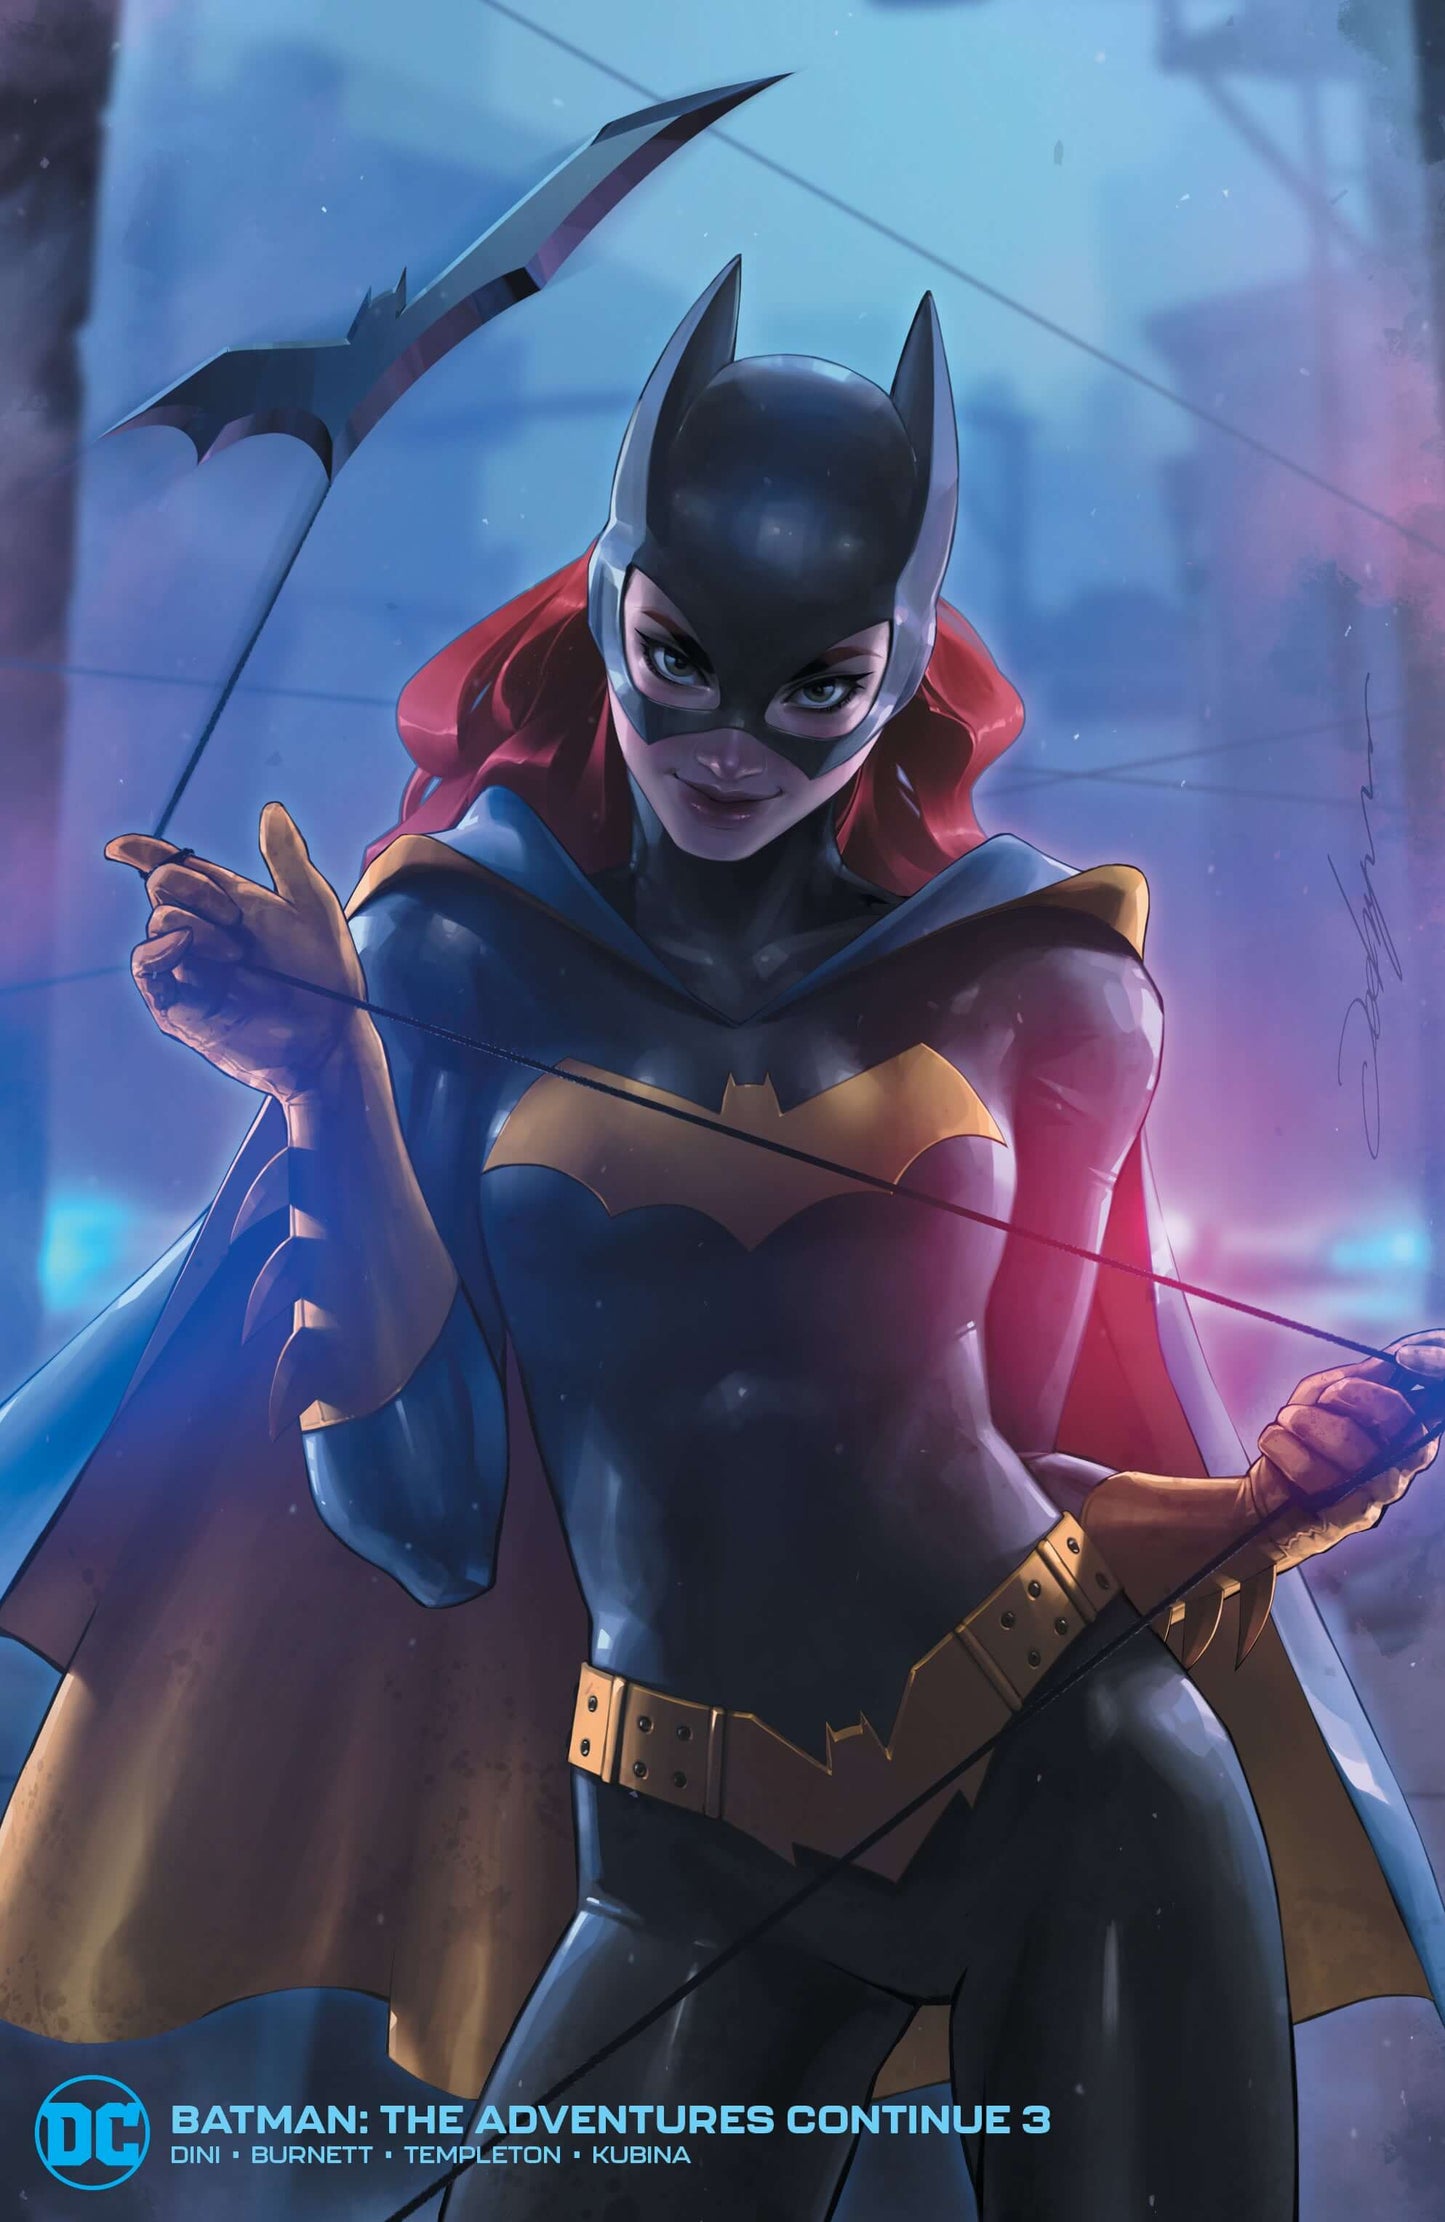 Batman The Adventures Continue #3 (Of 6) Jeehyung Lee Batgirl Variant  (08/05/2020) DC